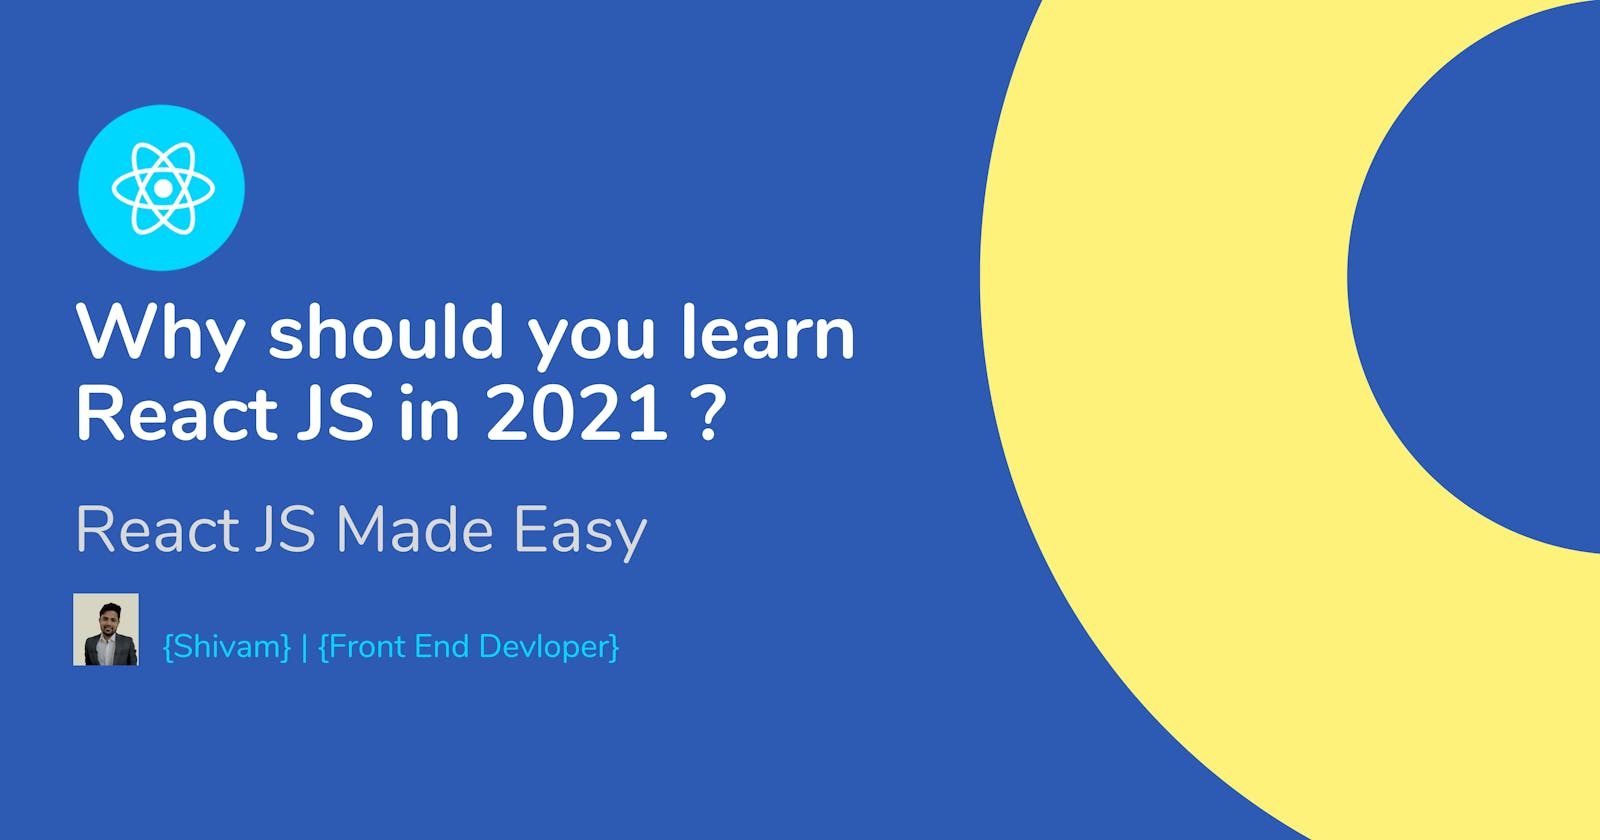 Why should you learn React JS in 2021 ?